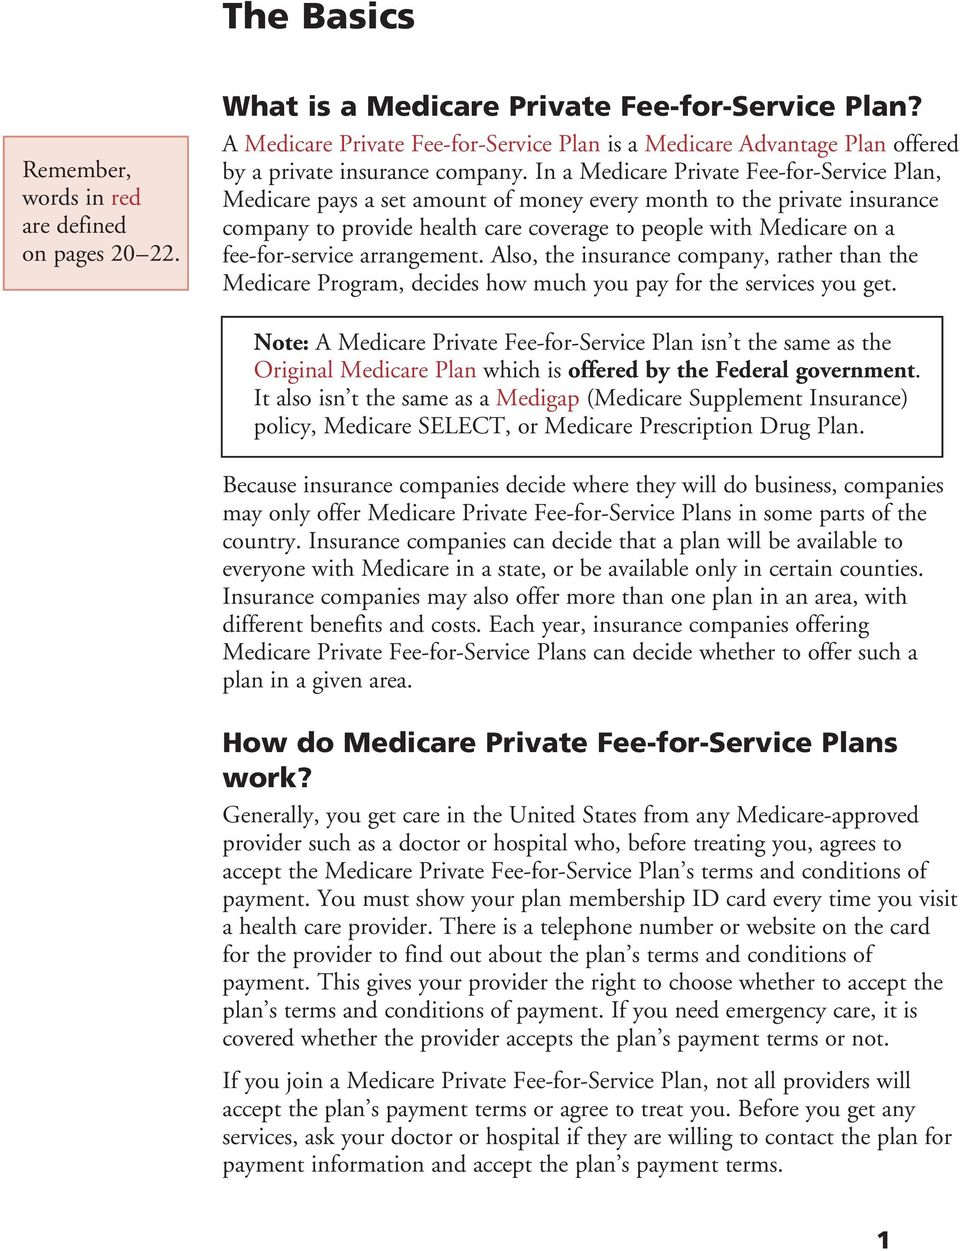 In a Medicare Private Fee-for-Service Plan, Medicare pays a set amount of money every month to the private insurance company to provide health care coverage to people with Medicare on a